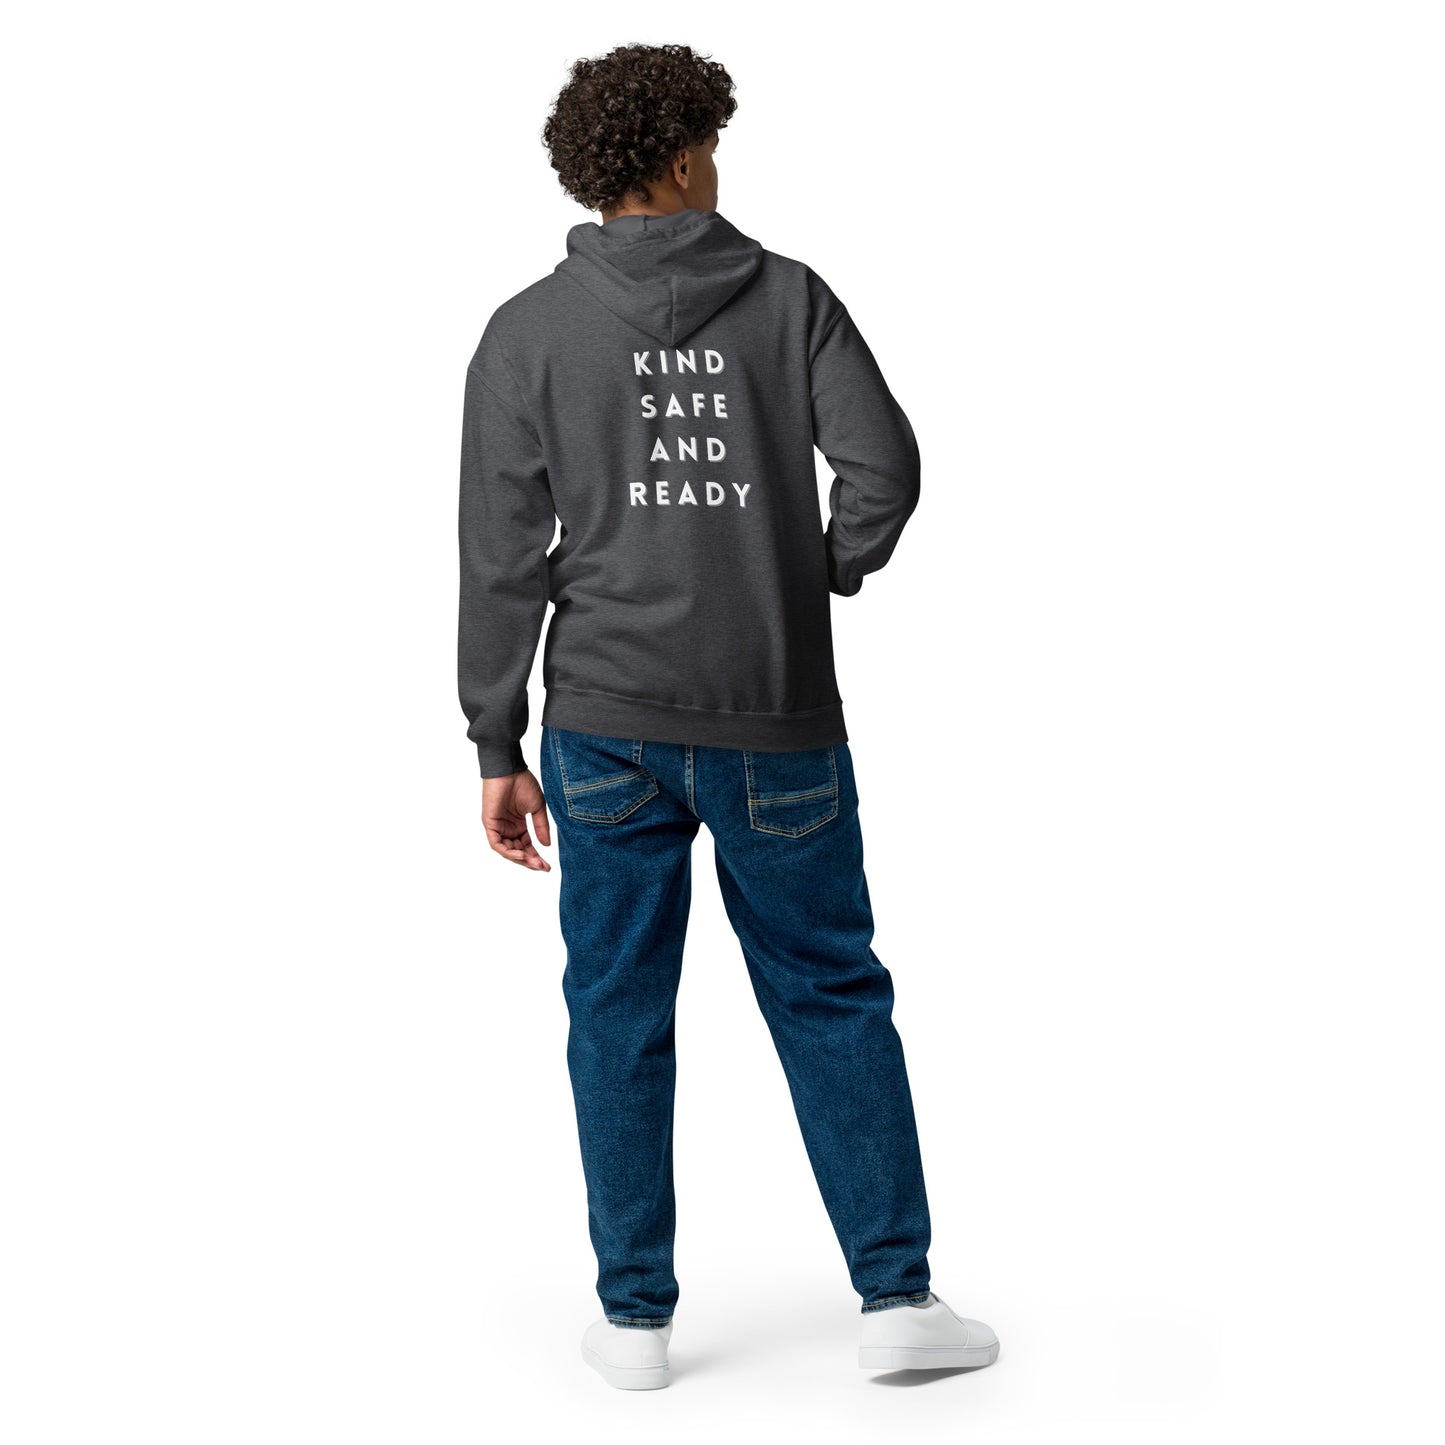 Kind, Safe, and Ready- Unisex heavy blend zip hoodie